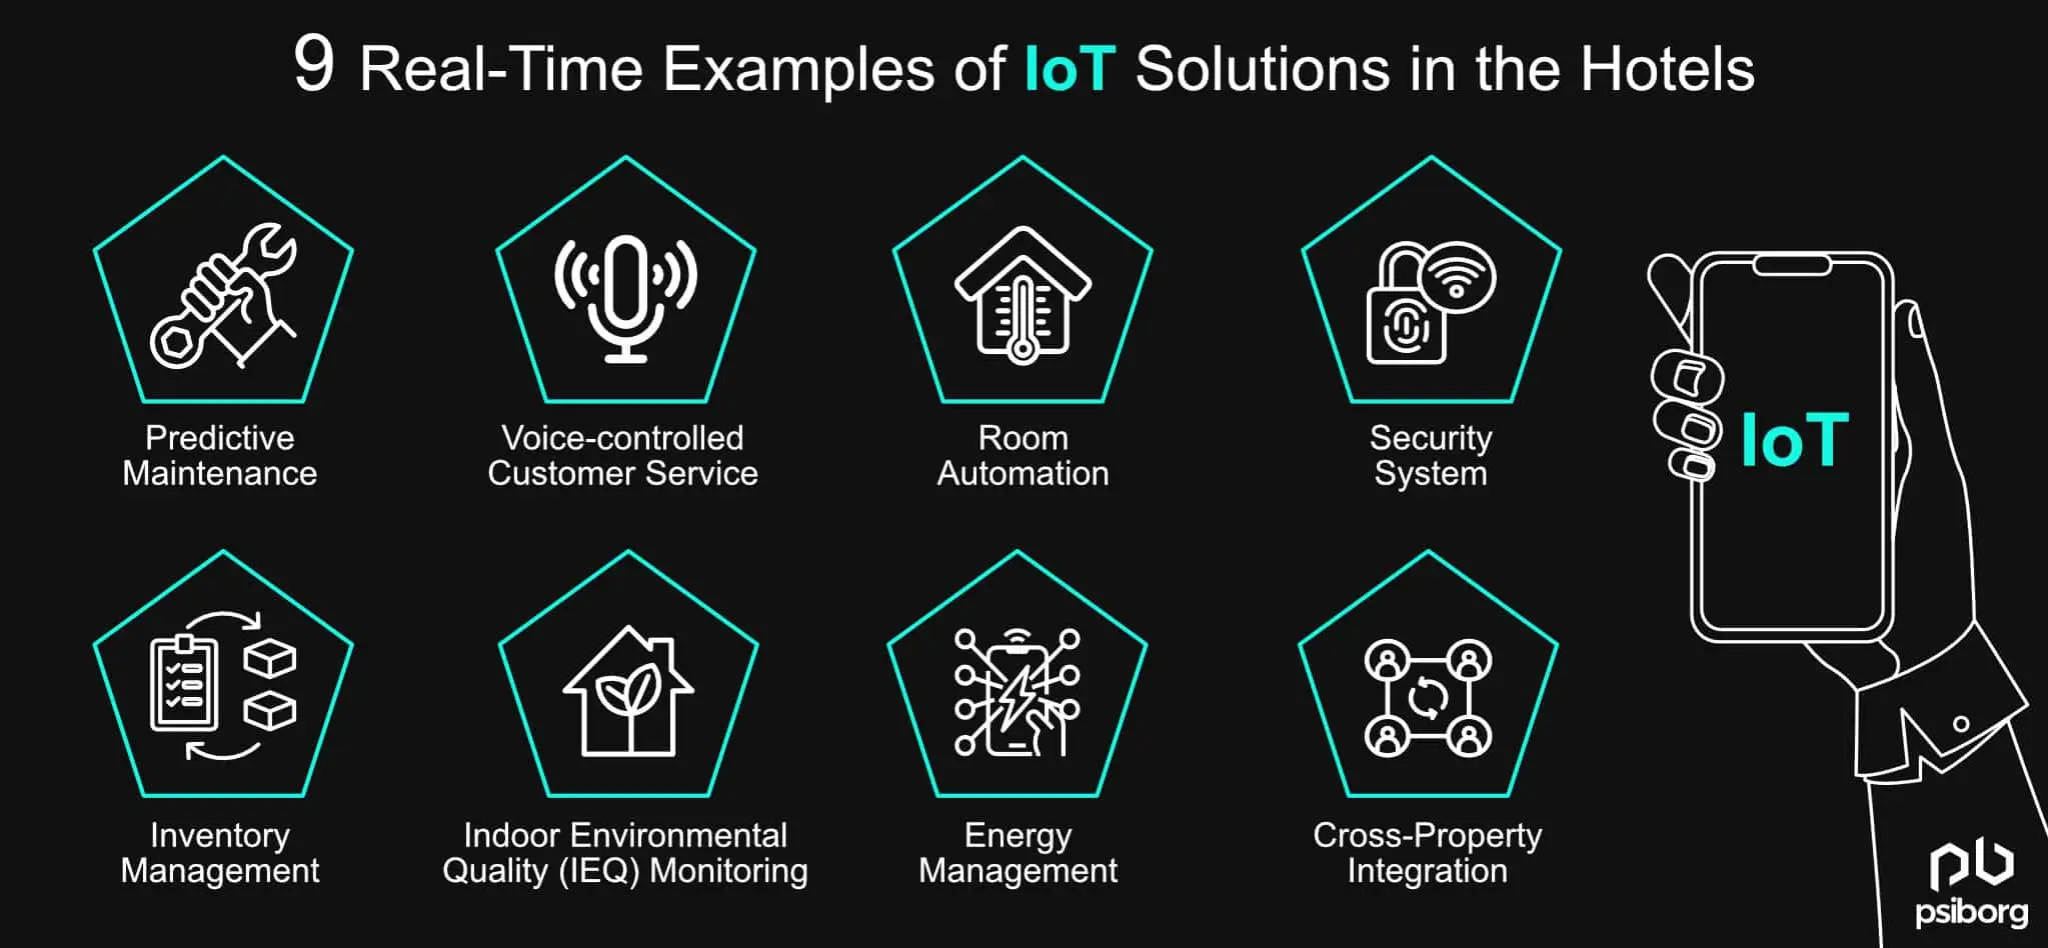 IoT solutions for hotels